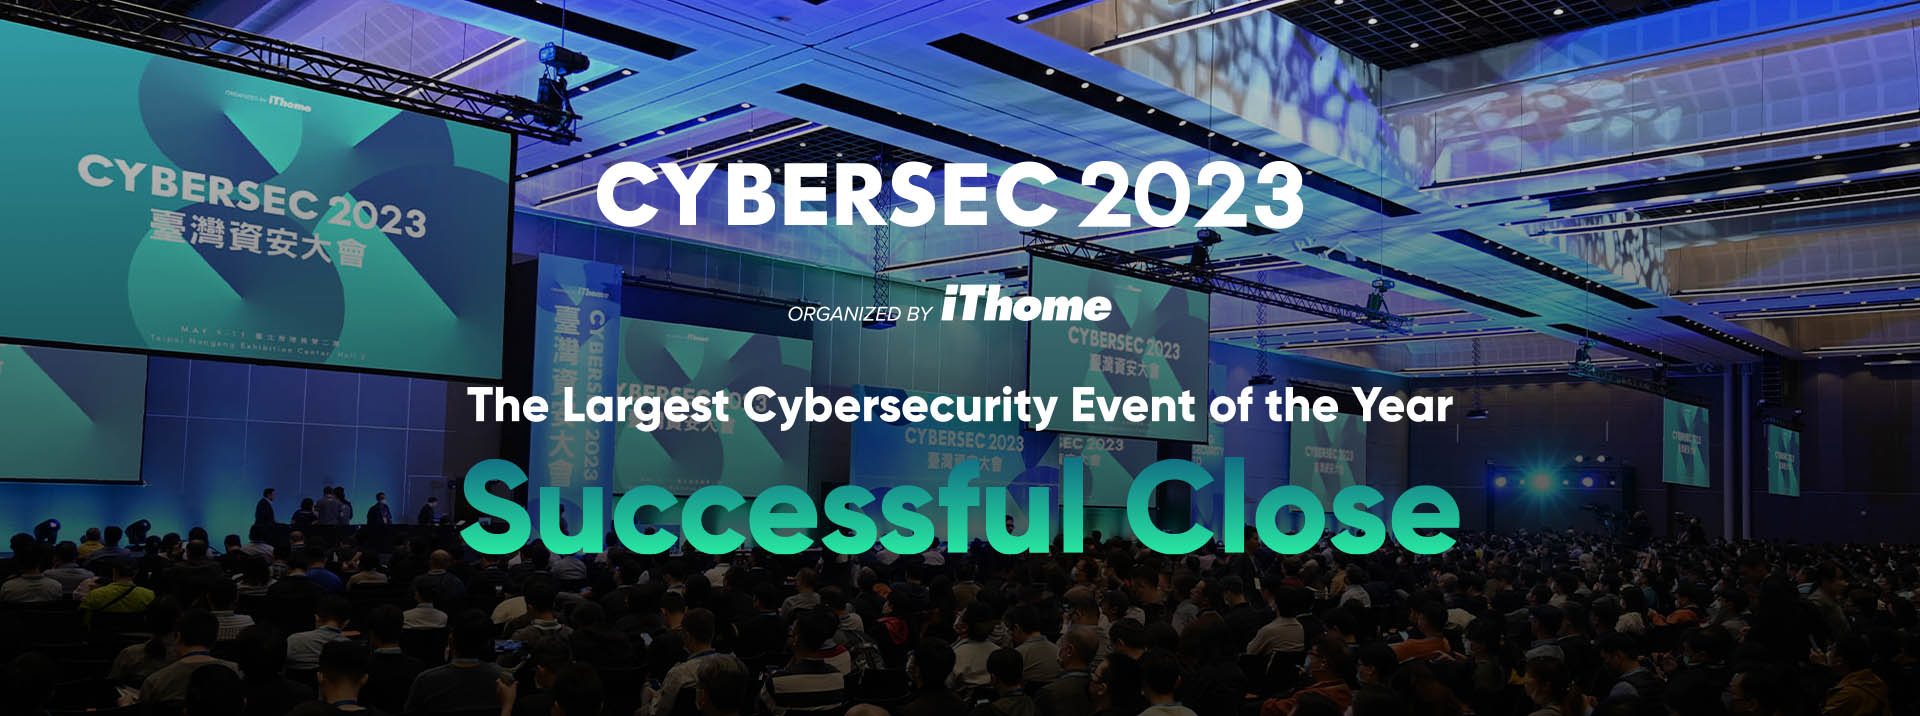 Cybersecurity conference CyberChess 2023